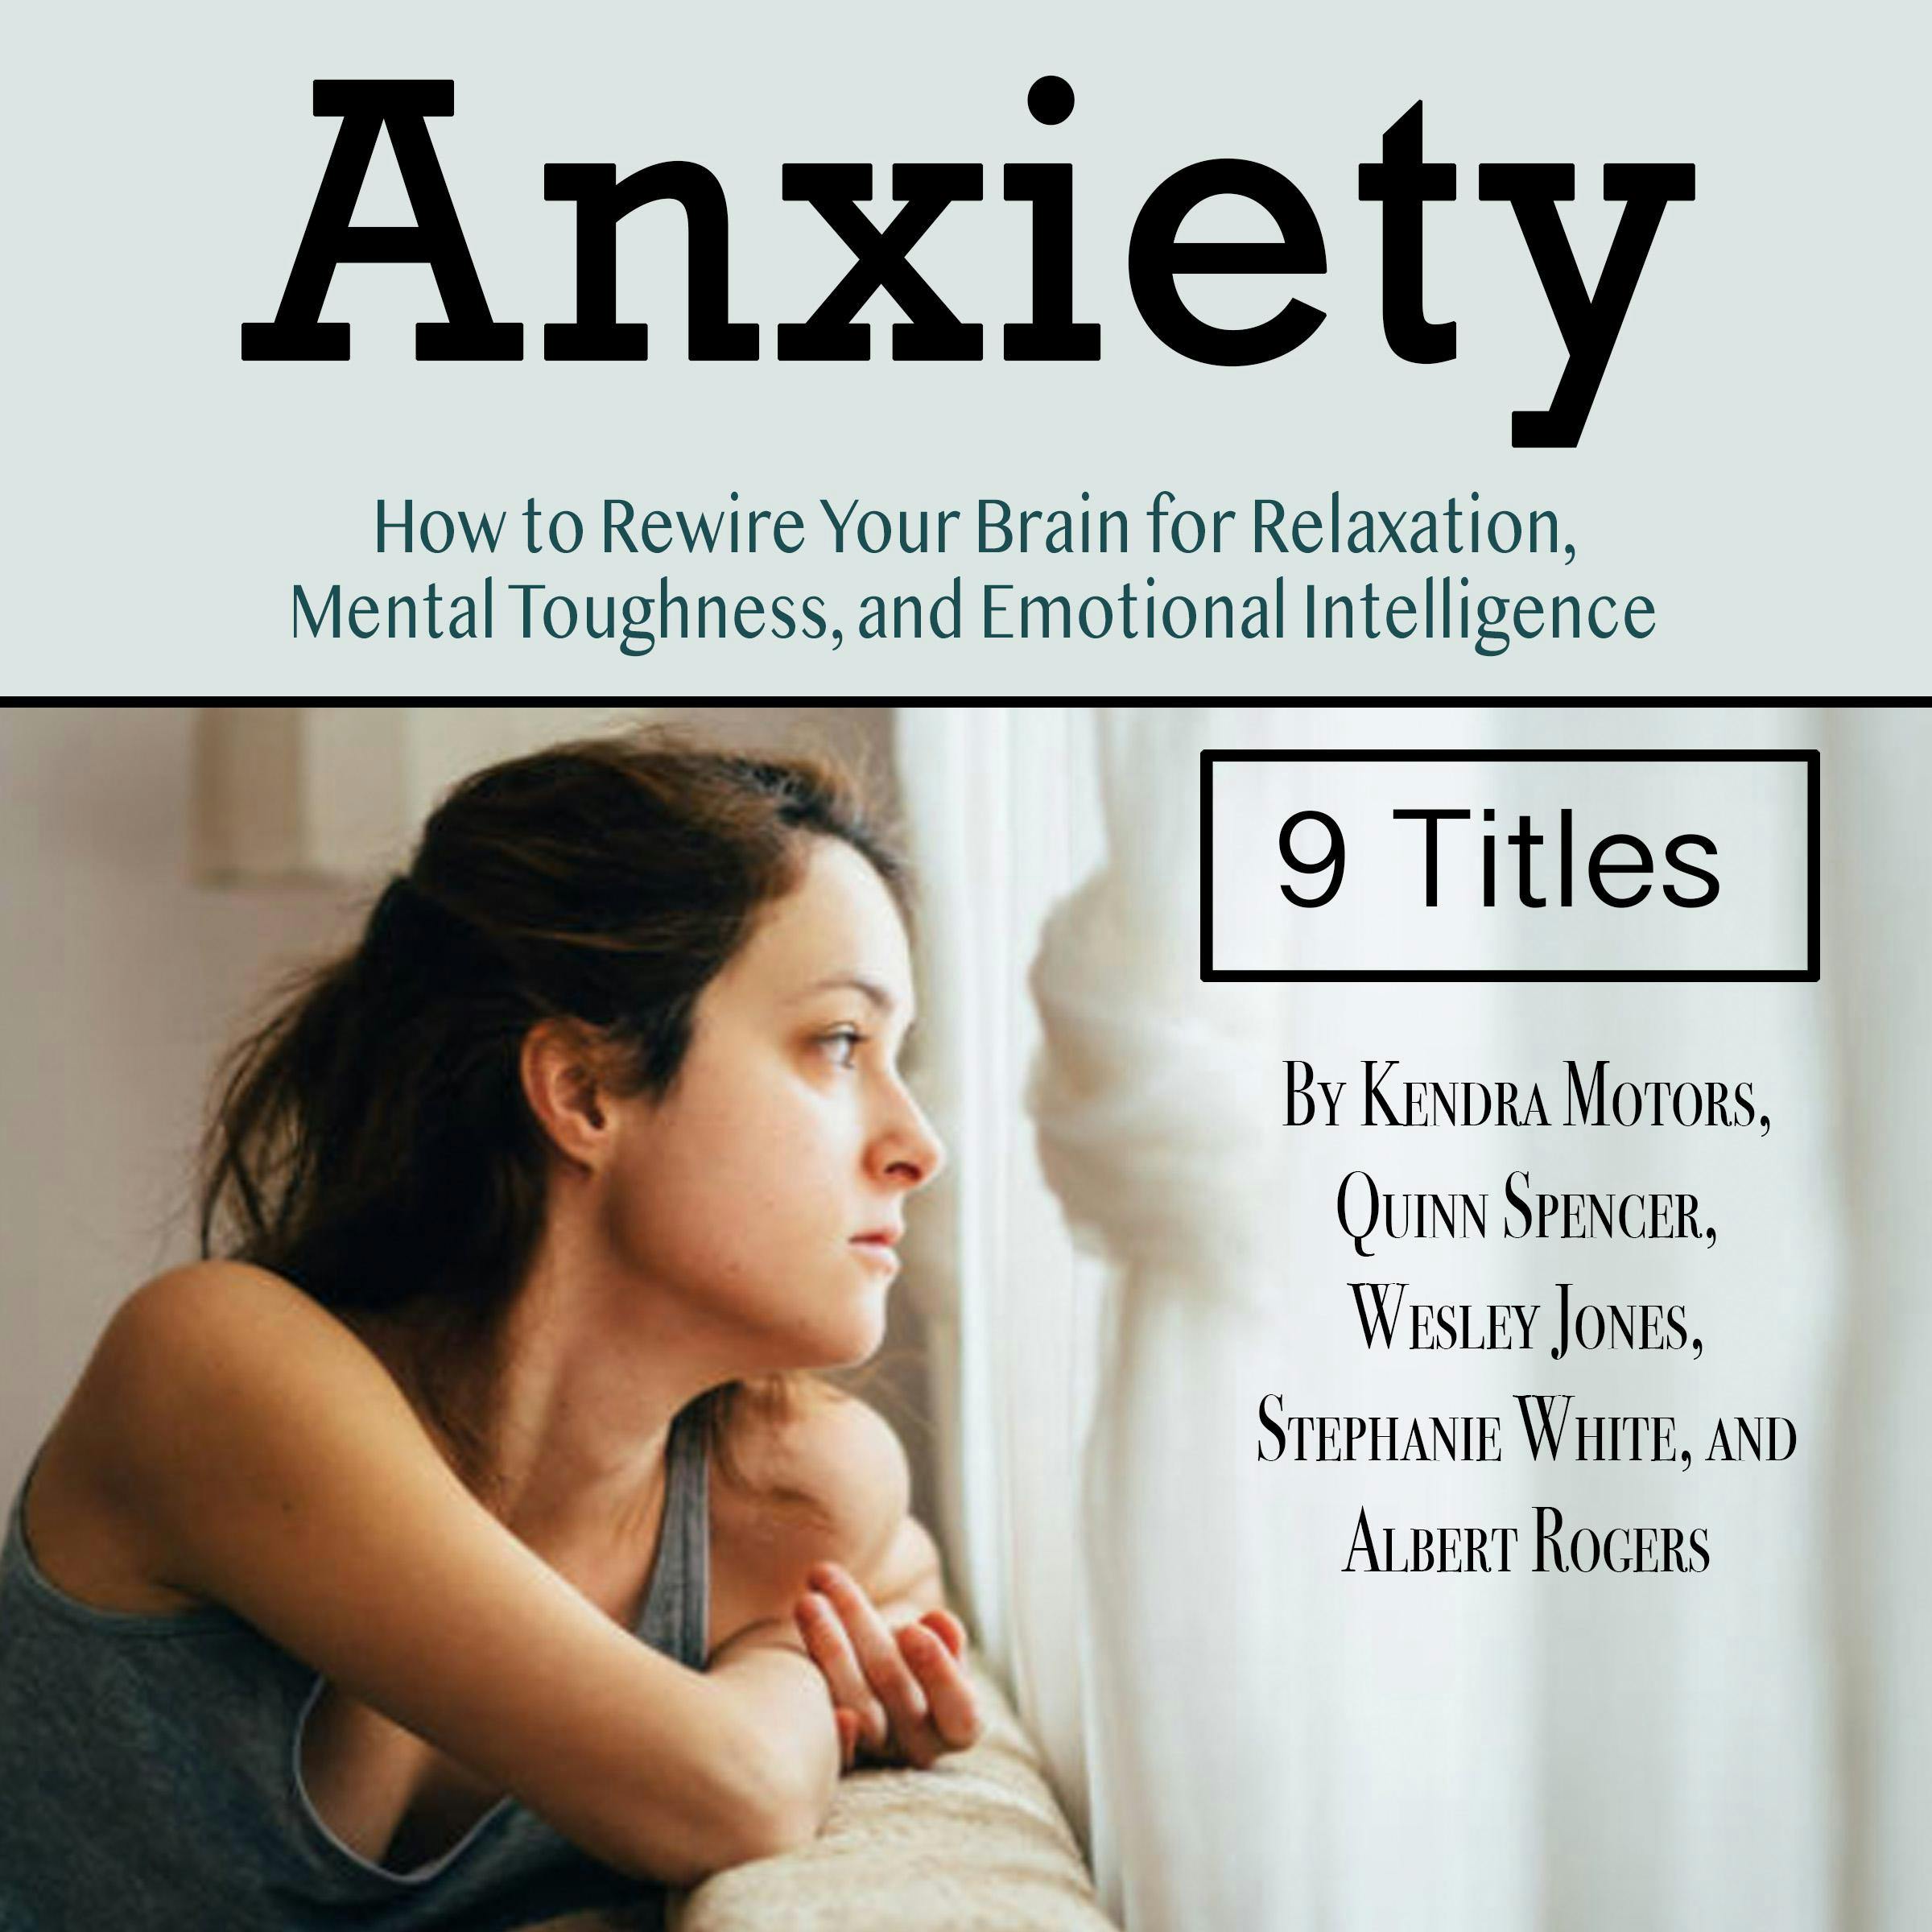 Anxiety: How to Rewire Your Brain for Relaxation, Mental Toughness, and Emotional Intelligence - Albert Rogers, Wesley Jones, Kendra Motors, Stephanie White, Quinn Spencer